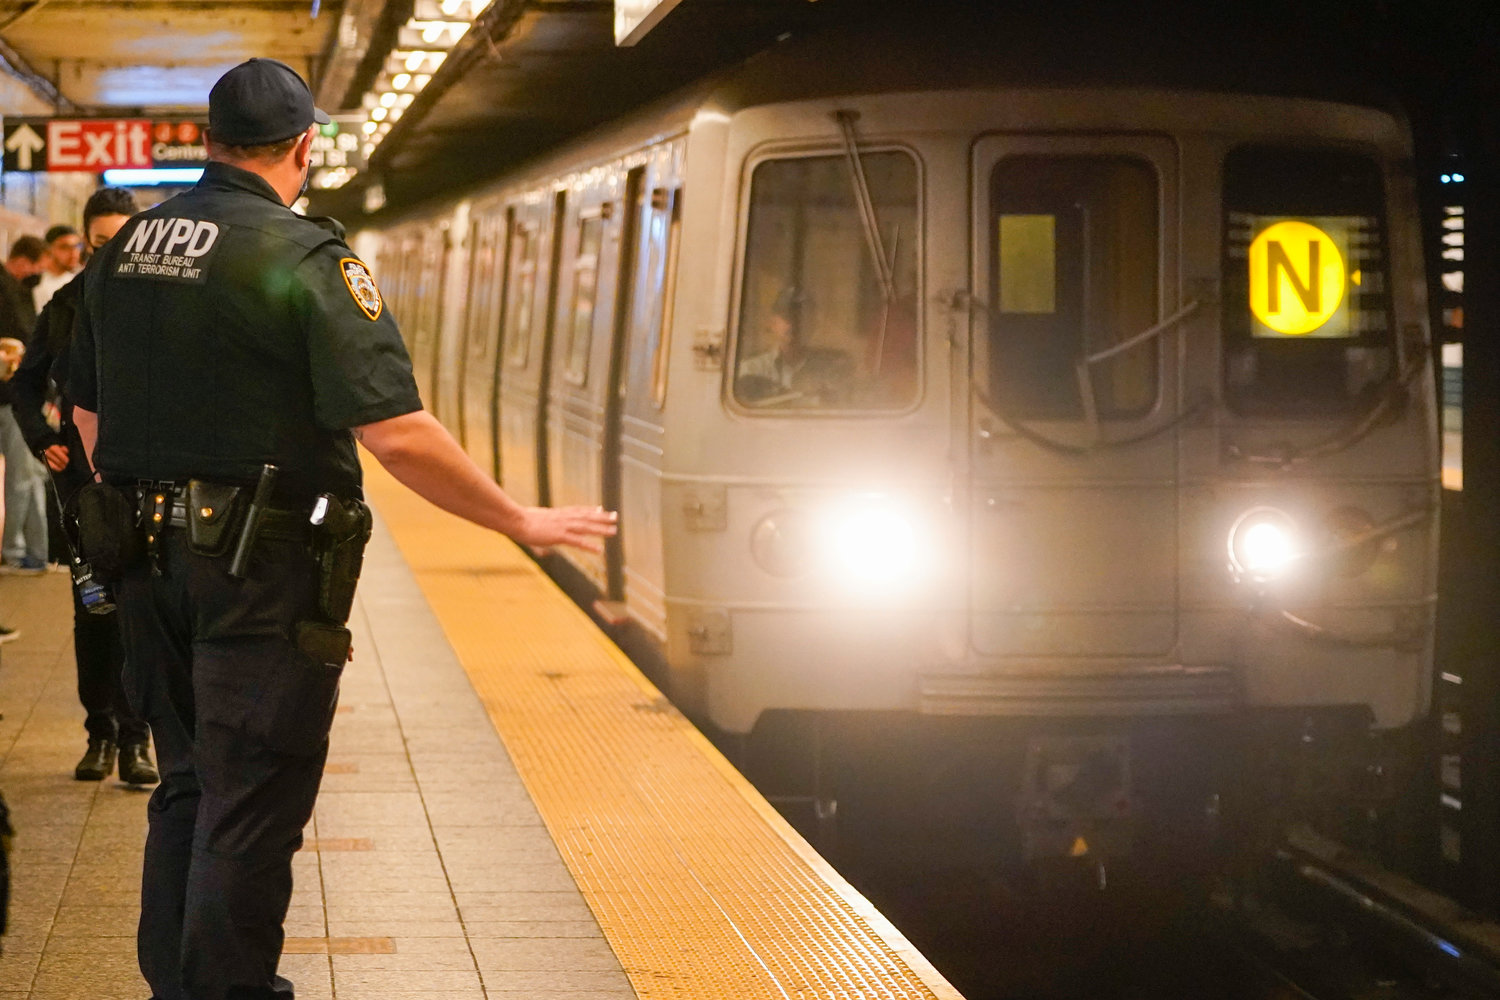 A New York Police Officers with the Transit Bureau Anti Terrorism Unit gestures to the train conducted as a train enters the Canal St. Q and N station, Tuesday, May 24, 2022, in New York. Andrew Abdullah, the man wanted in an apparently unprovoked fatal shooting aboard a New York City subway train was taken into custody by police on Tuesday, hours after authorities posted his name and photo on social media and implored the public to help find him. (AP Photo/Mary Altaffer)